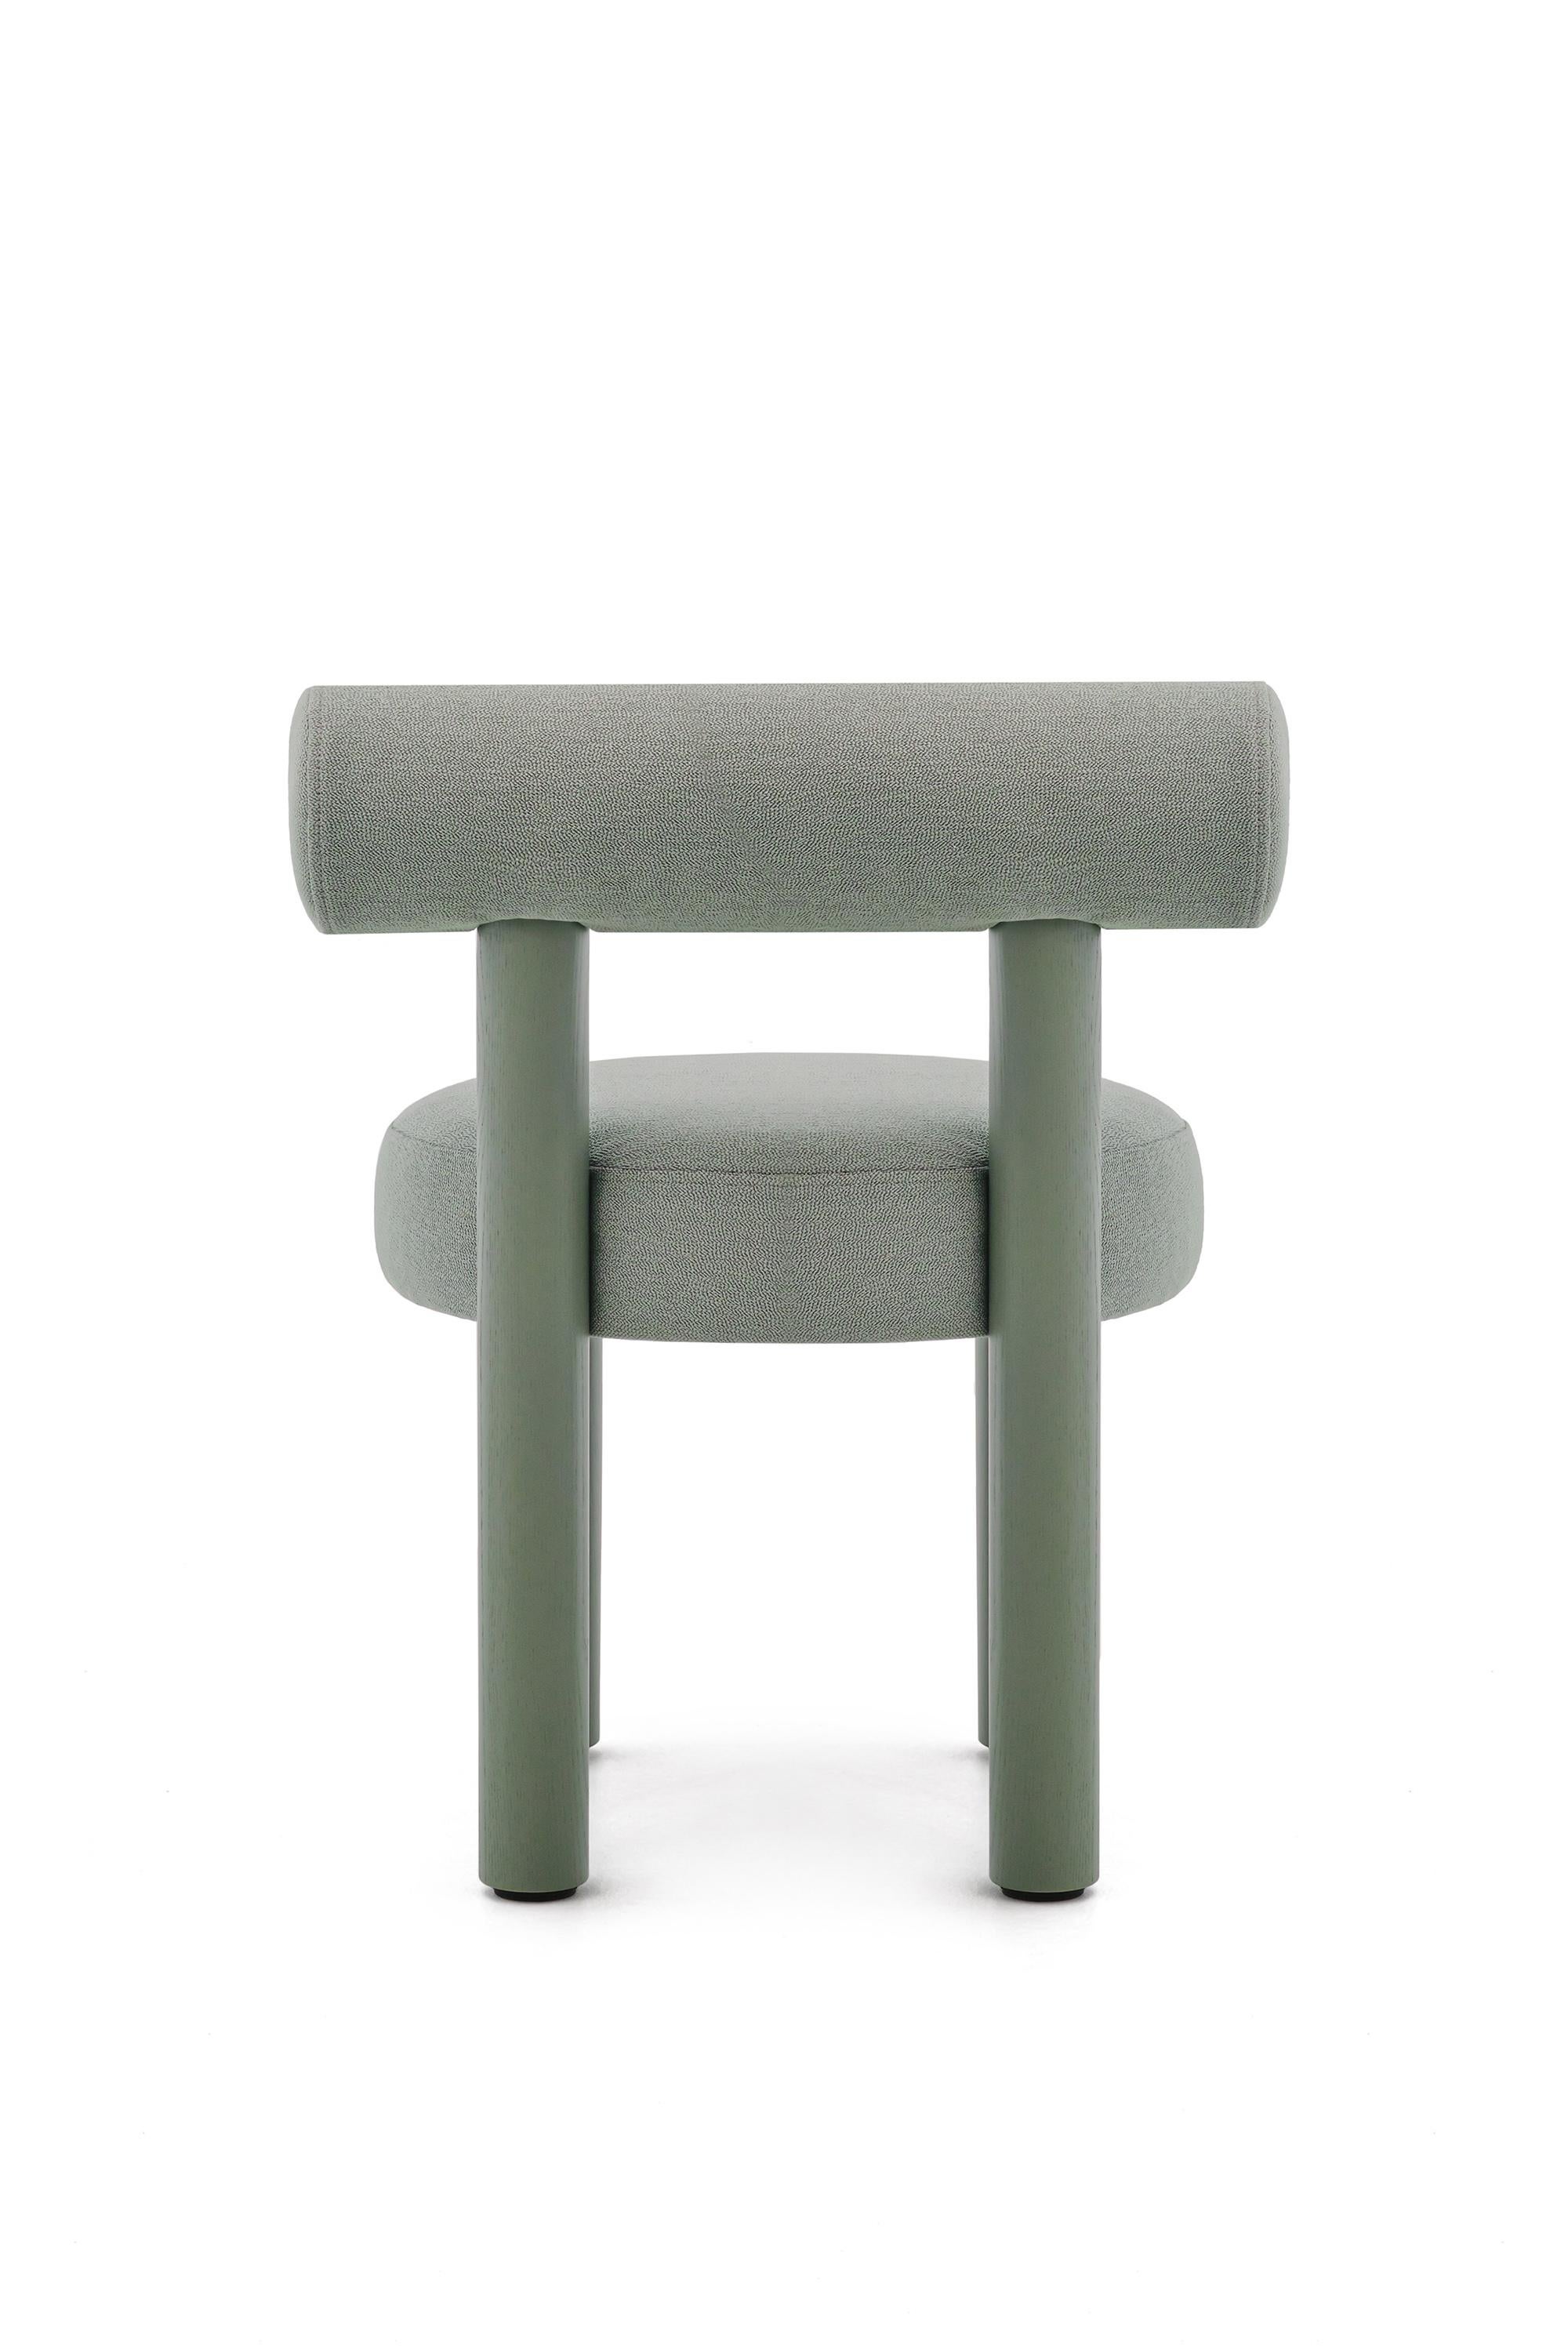 Modern Dining Chair Gropius CS2 in Various Fabrics with Wooden Legs by Noom 13